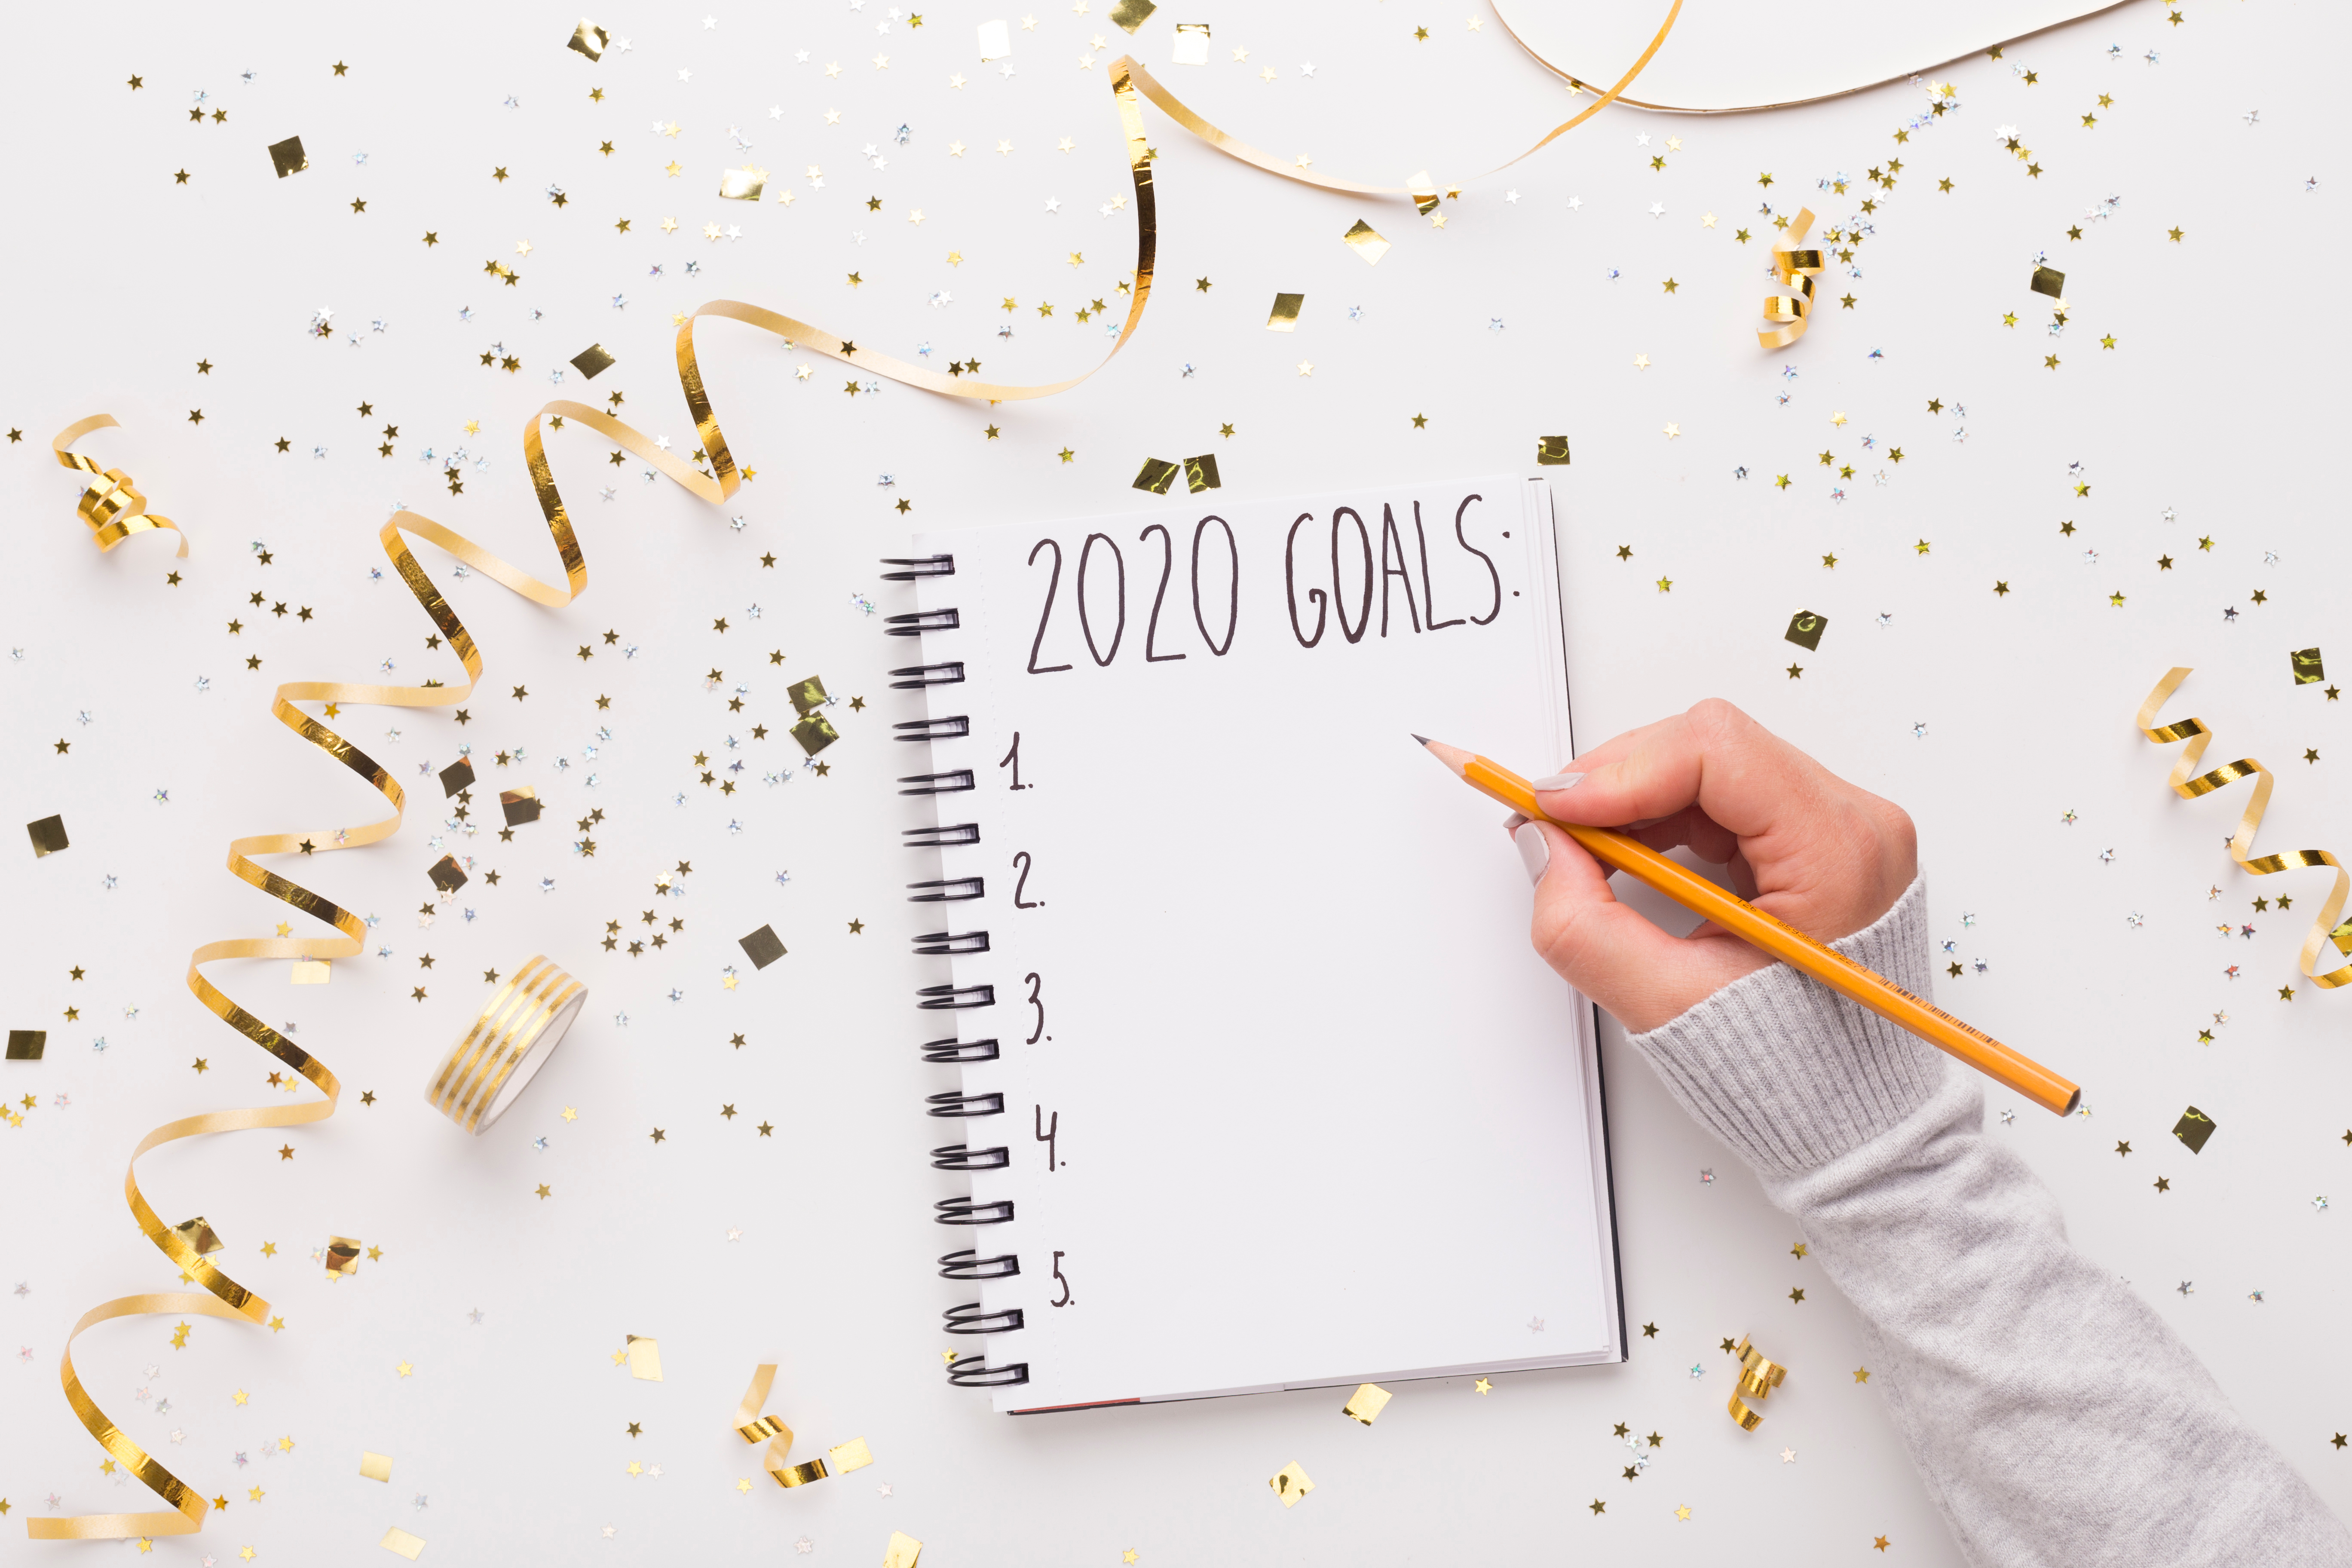 Top Five Tips to Create Goals and Accomplish Them in 2020